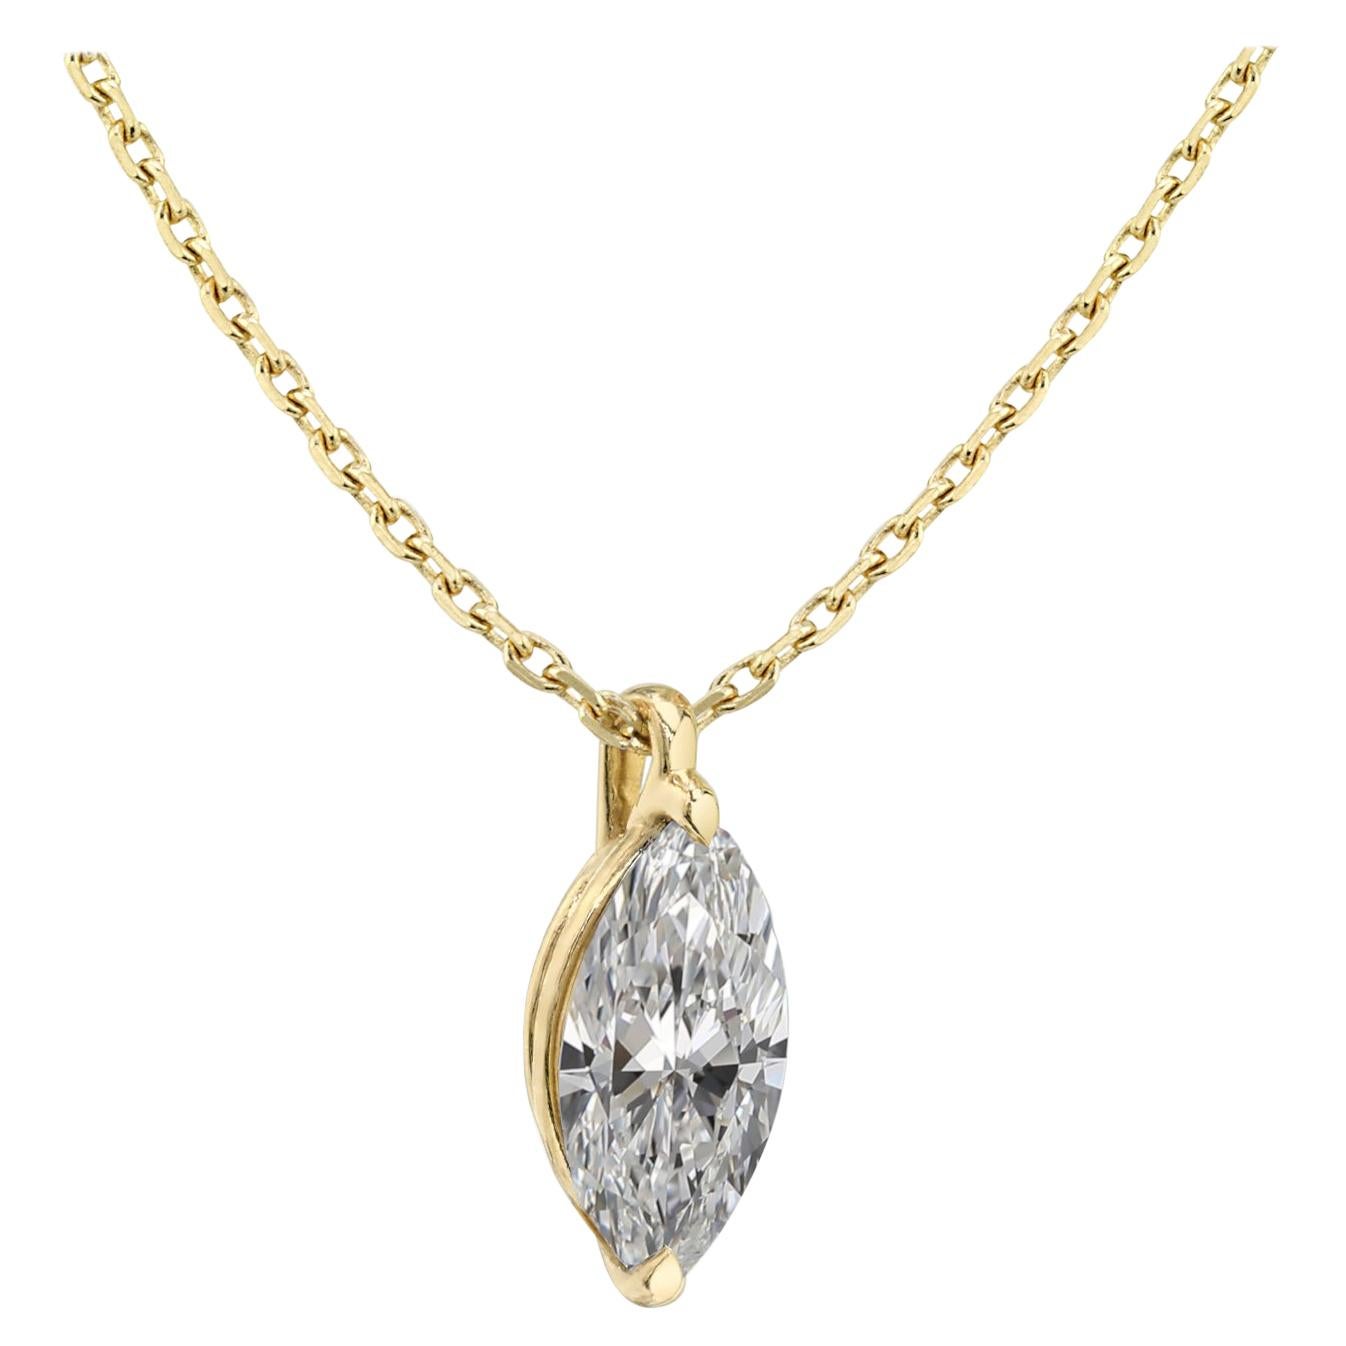 1.5 Ct Marquise Cut Diamond Pendant F Color S1 Clarity 14k Yellow Gold Necklace